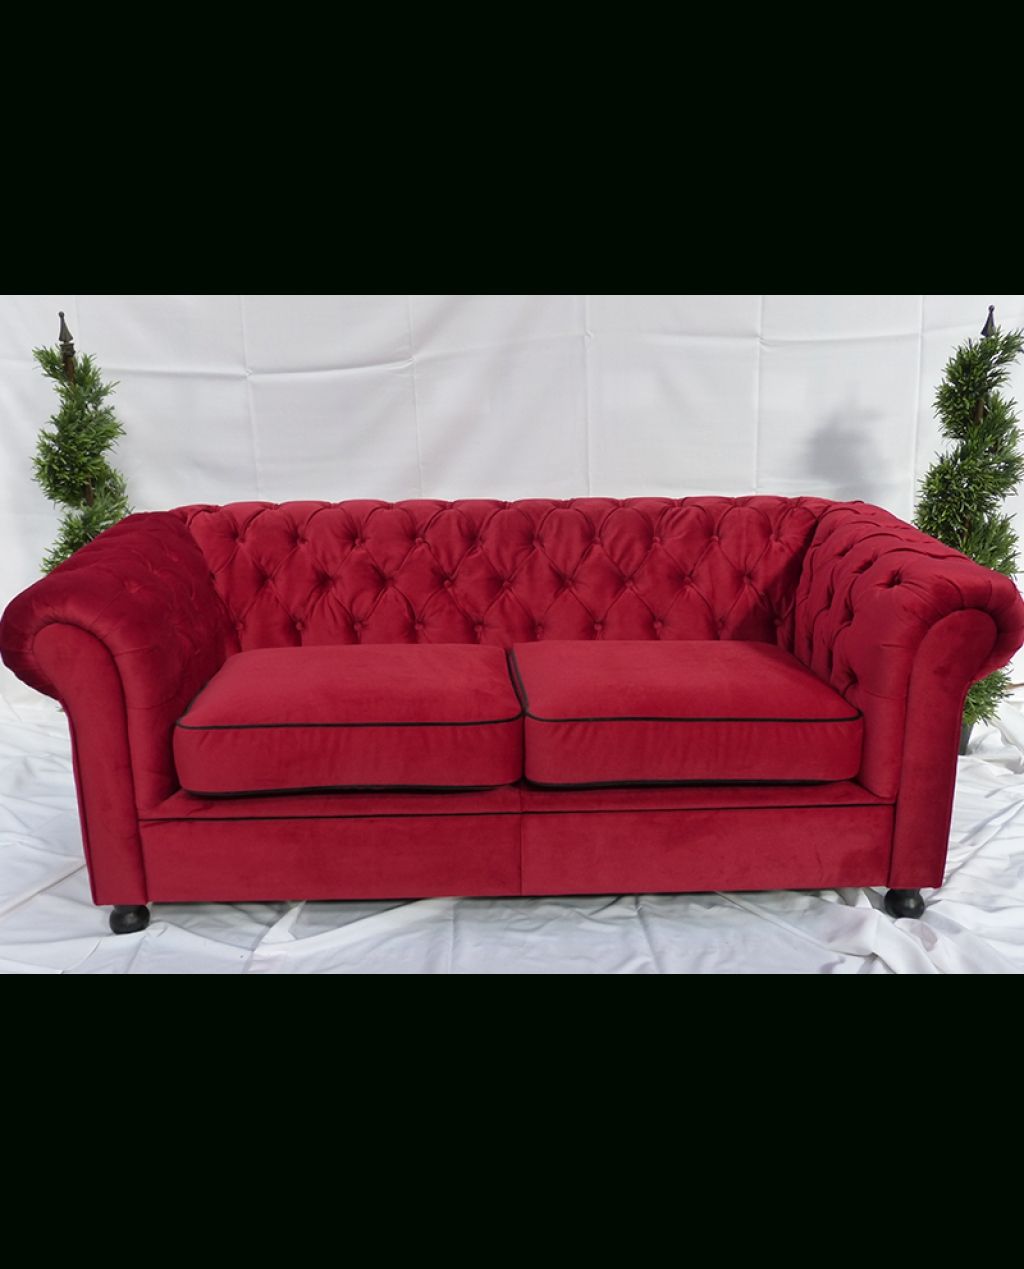 Red Velvet Chesterfield Style 3 Seater Sofa | City Furniture Hire For Red Chesterfield Sofas (View 7 of 15)